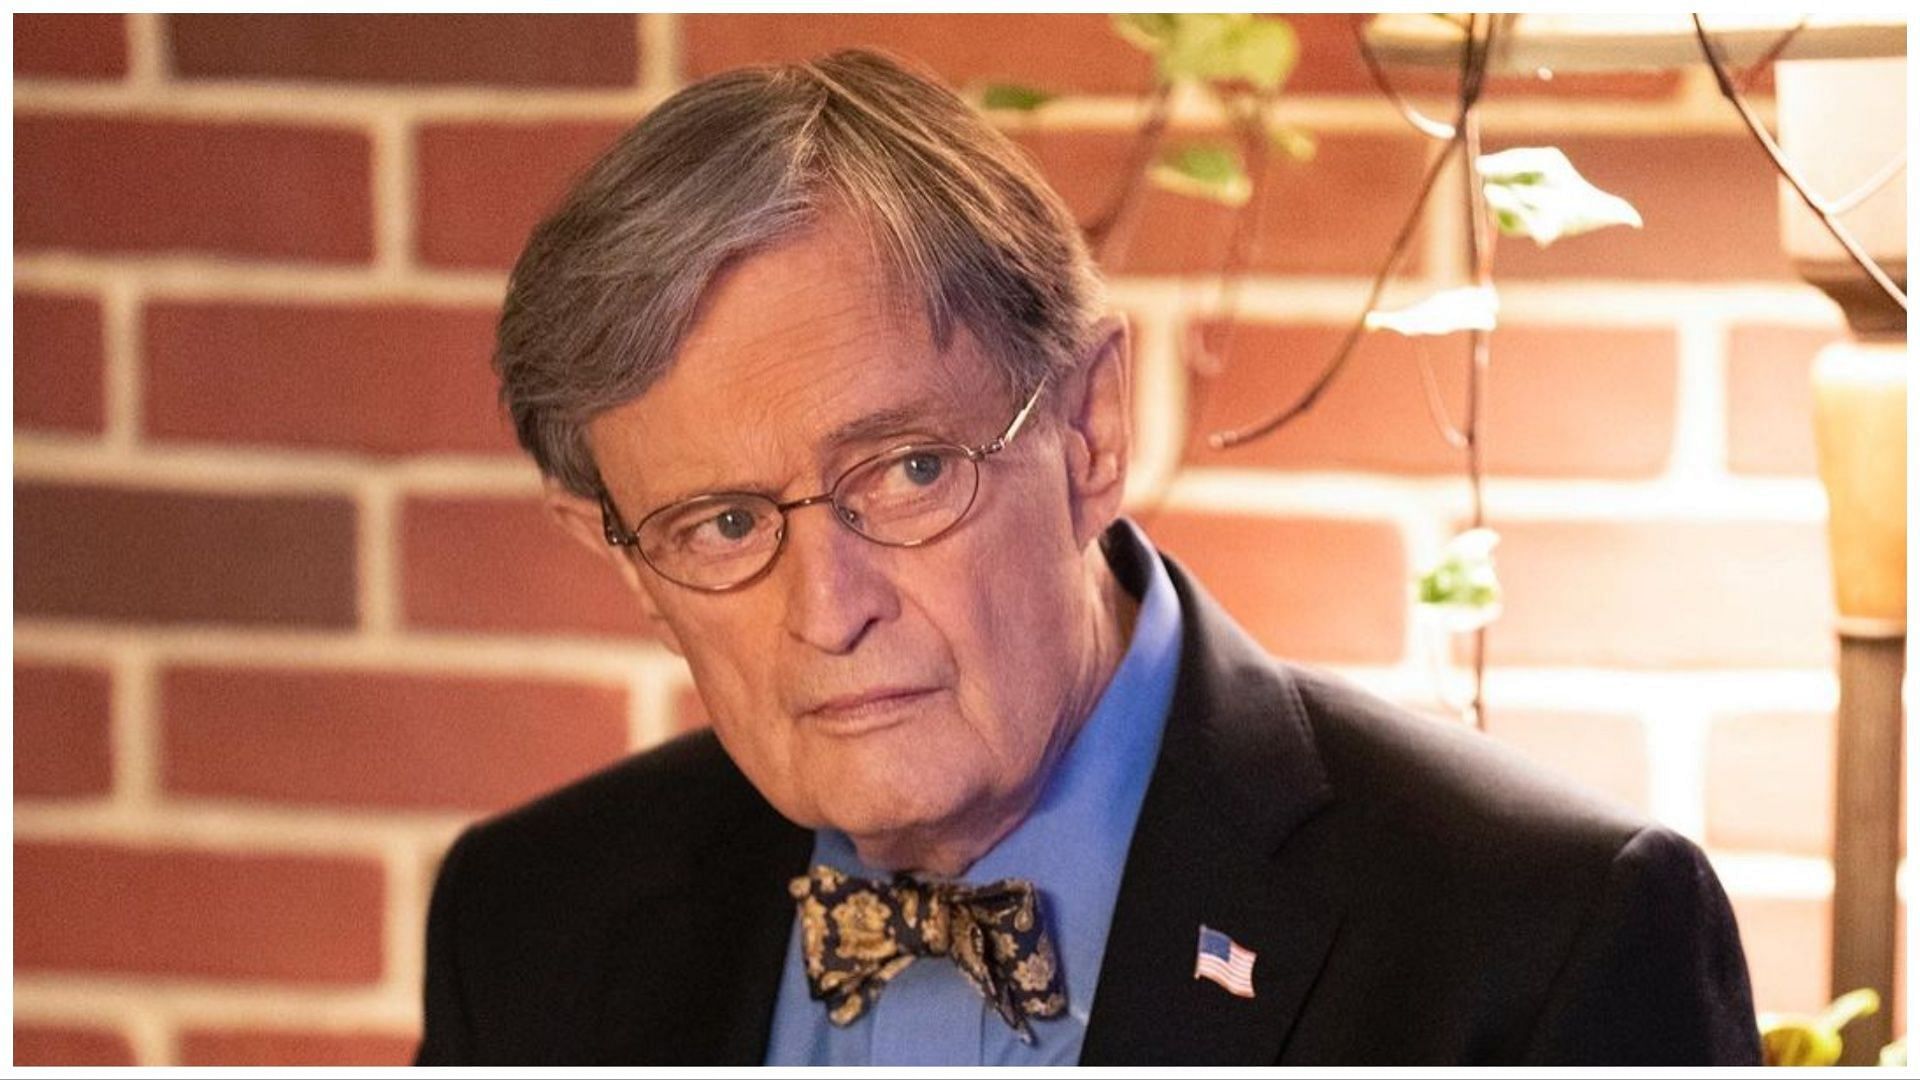 David McCallum plays the role of Ducky in NCIS. (Image via Instagram)